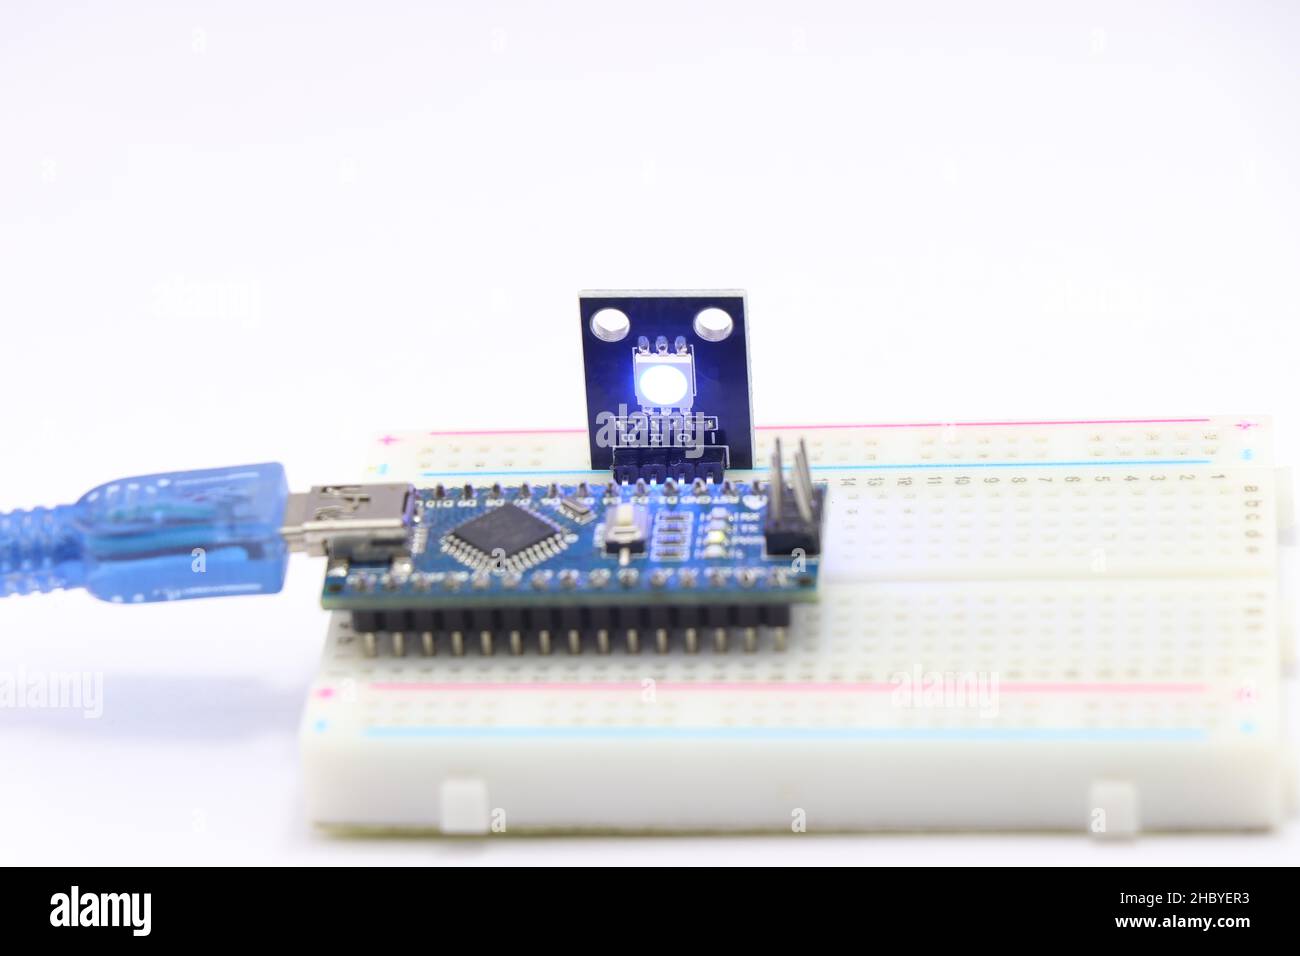 RGB SMD LED module with lights controlled by microcontroller. Do it yourself arduino projects Stock Photo - Alamy